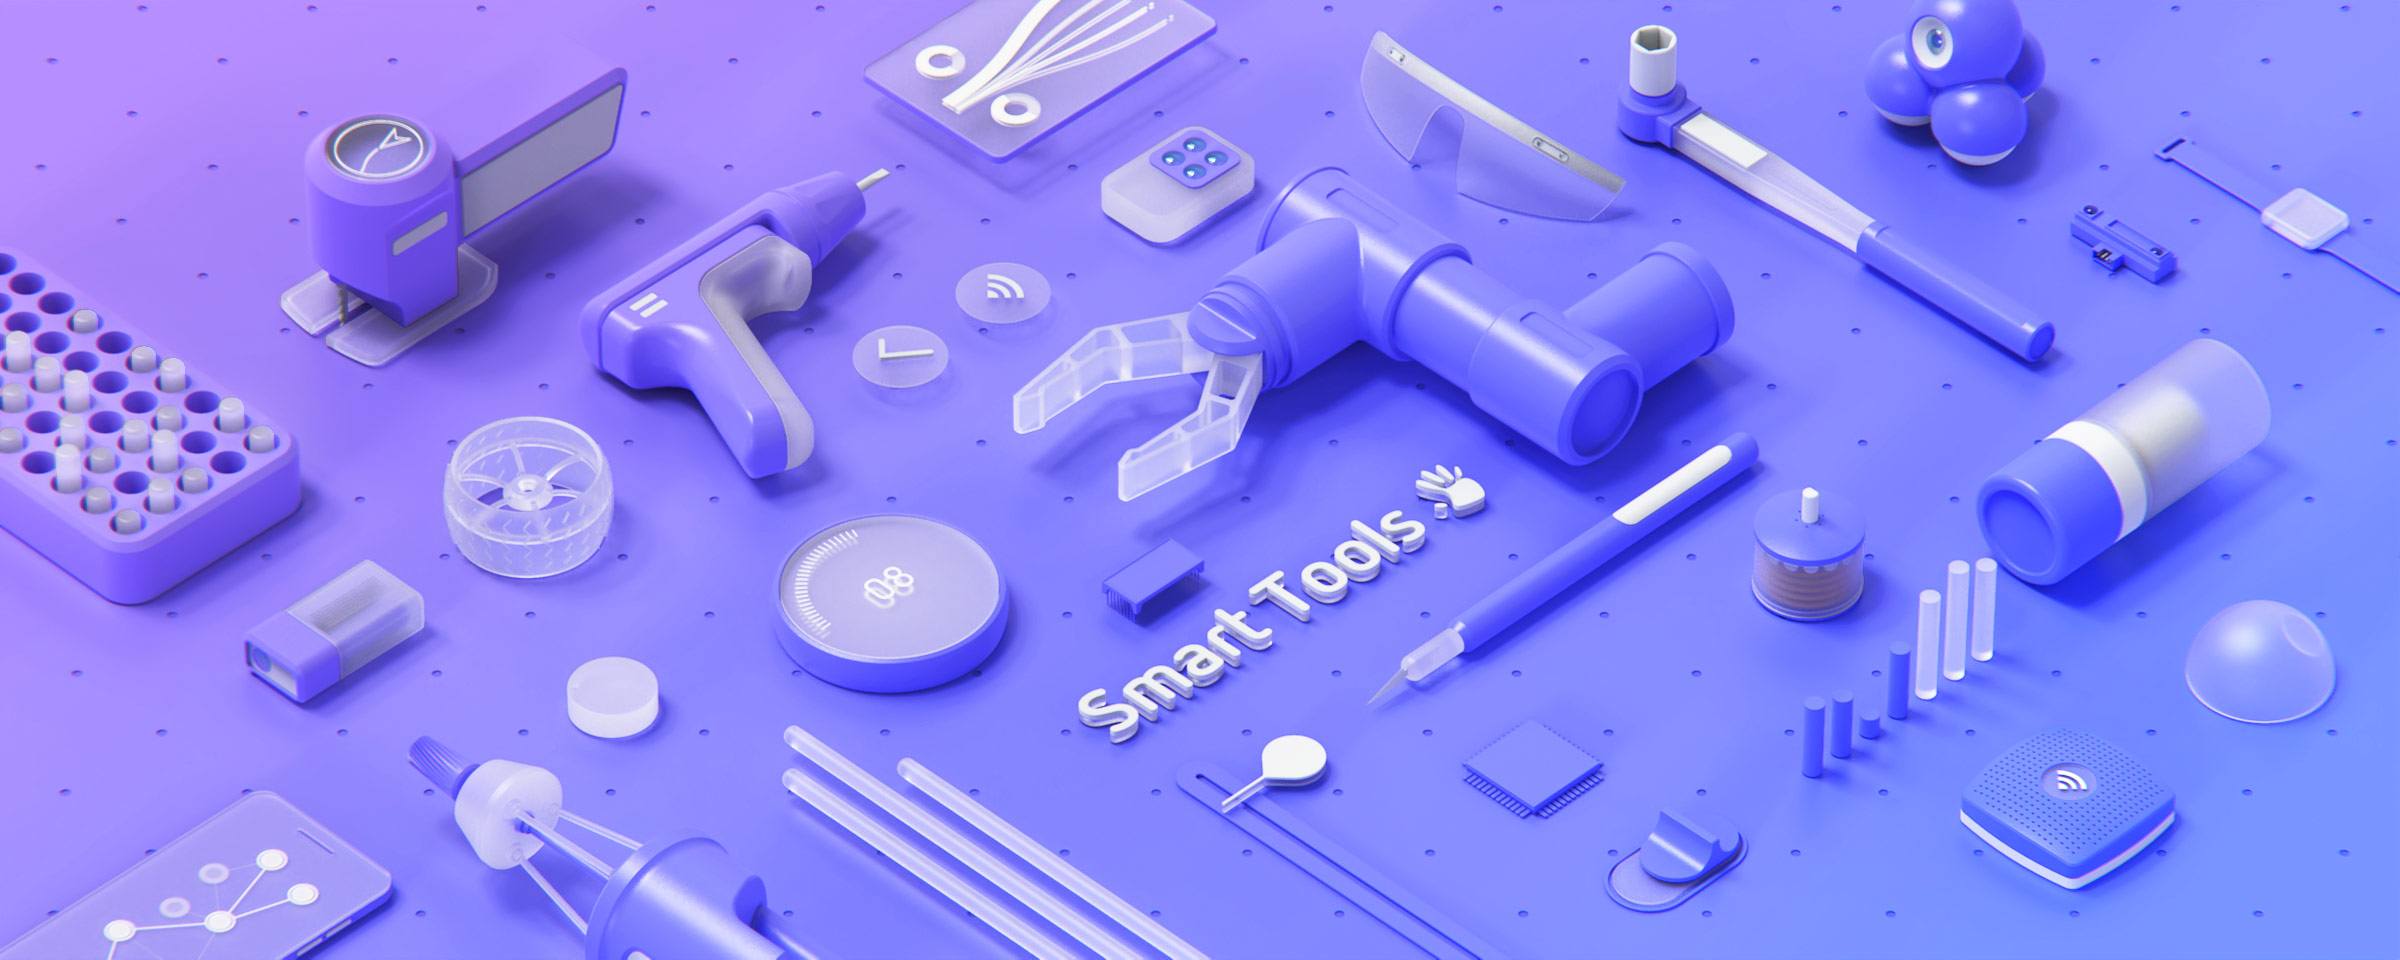 Smart tools in different shapes